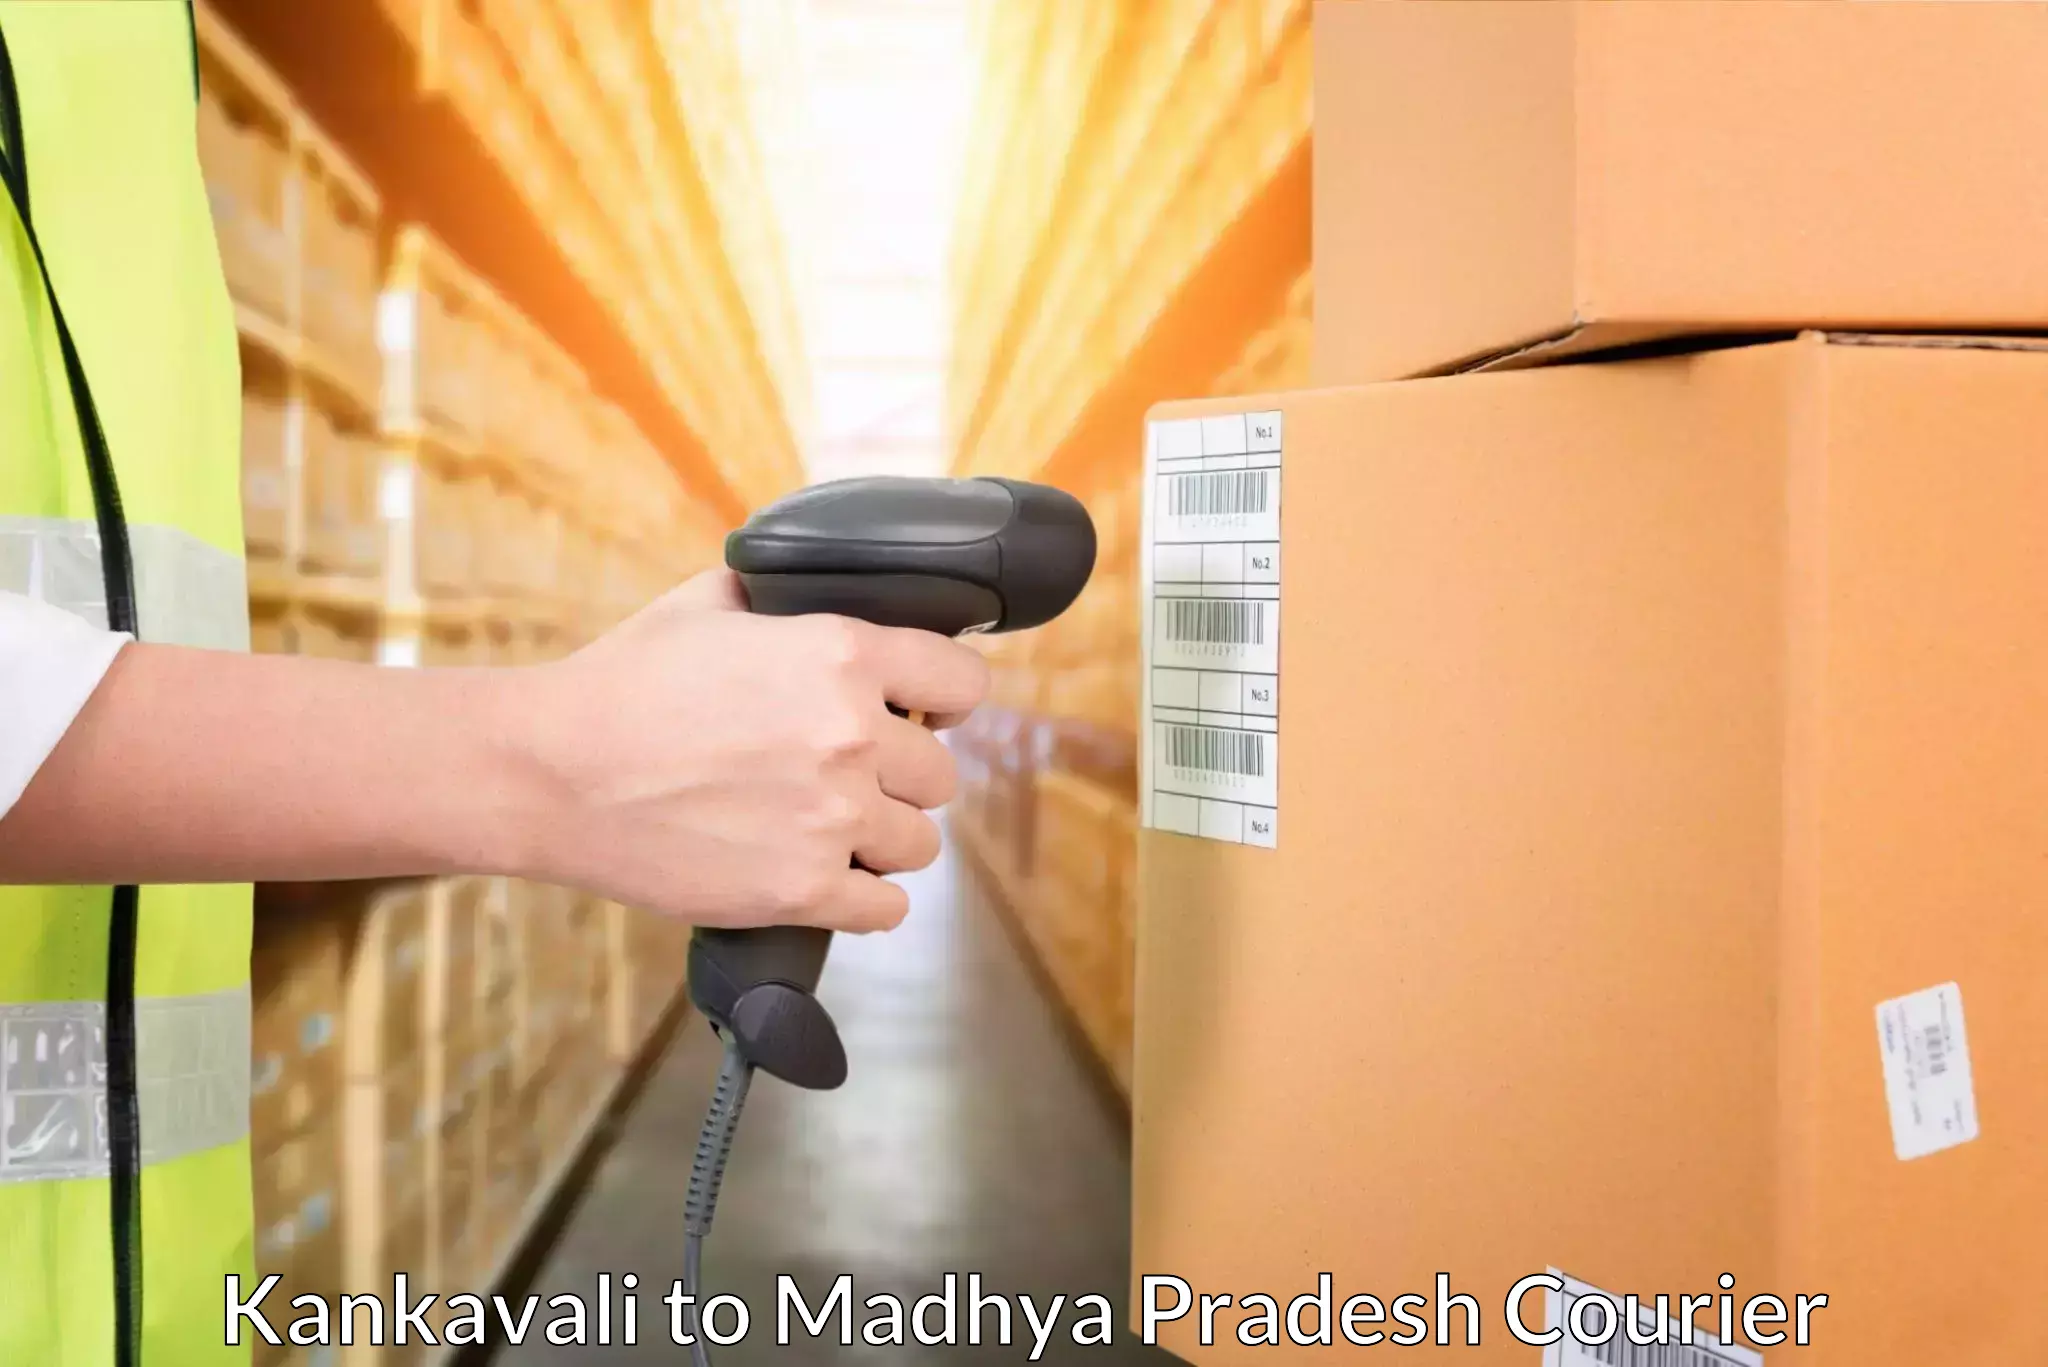 Global shipping networks Kankavali to BHEL Bhopal